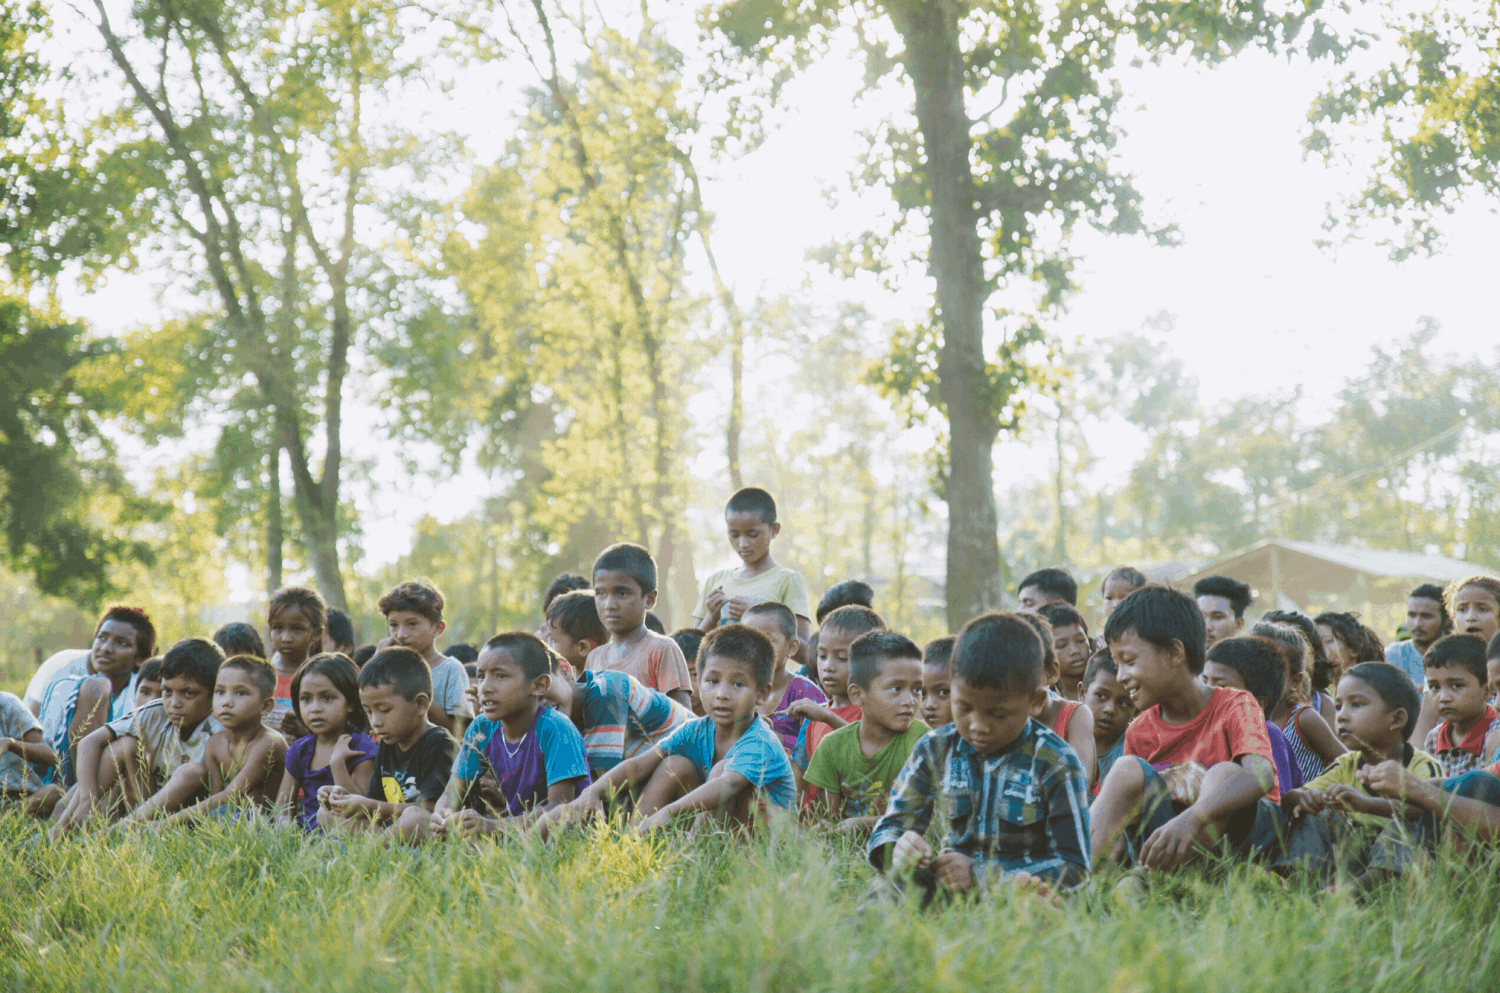 Reduced Inequalities, Children gather in a jungle field in Chitwan, Nepal to participate in community programs run by Himalayan Life